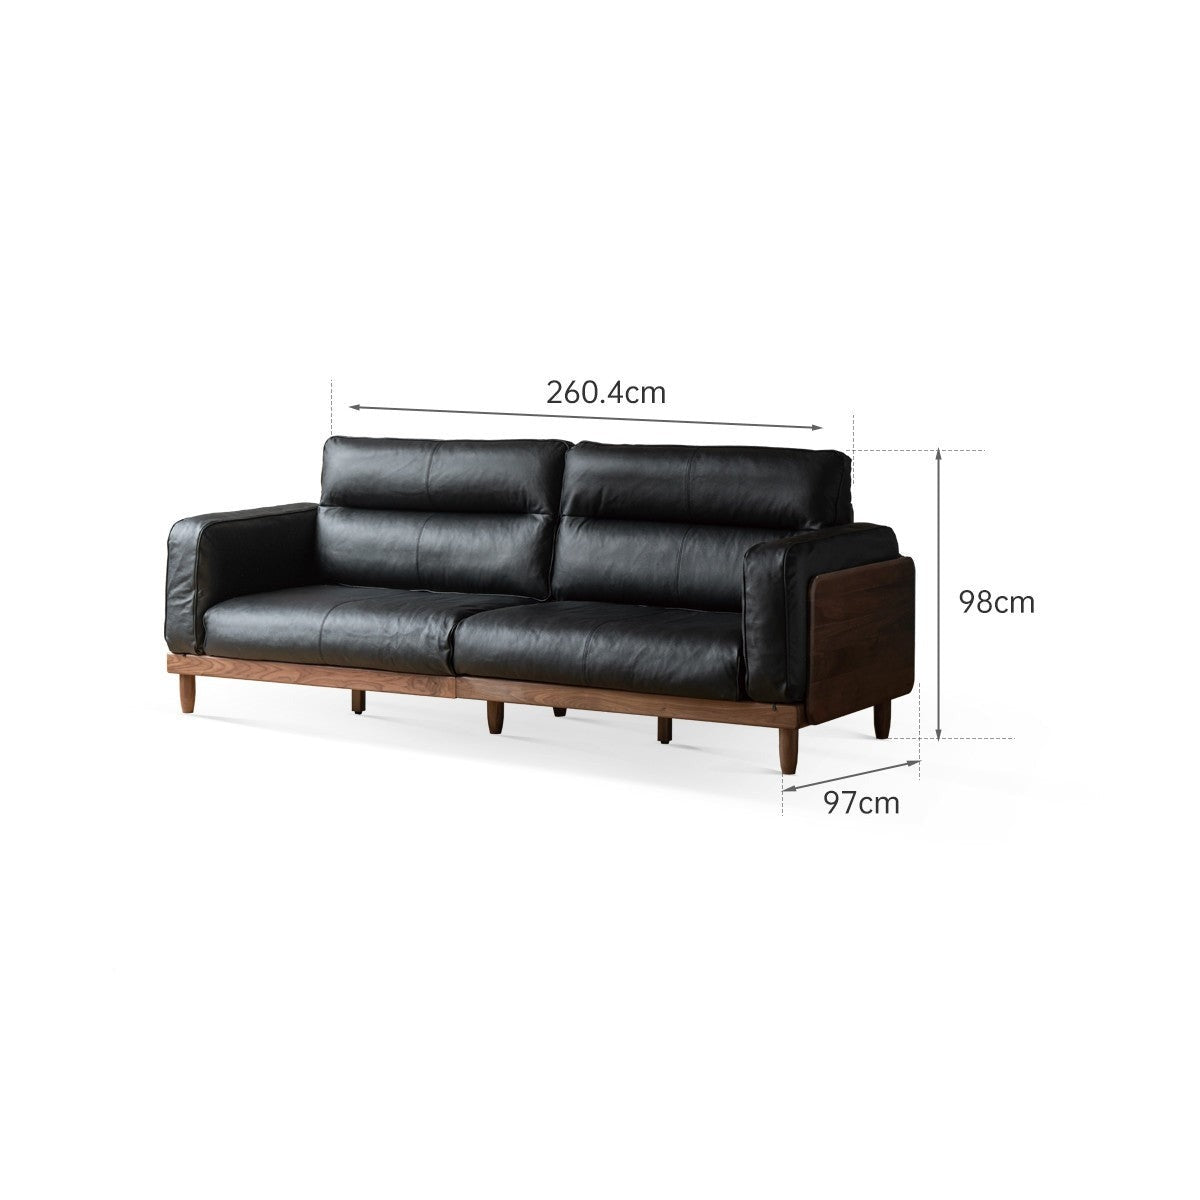 Black walnut solid wood leather top layer yellow cowhide sofa"